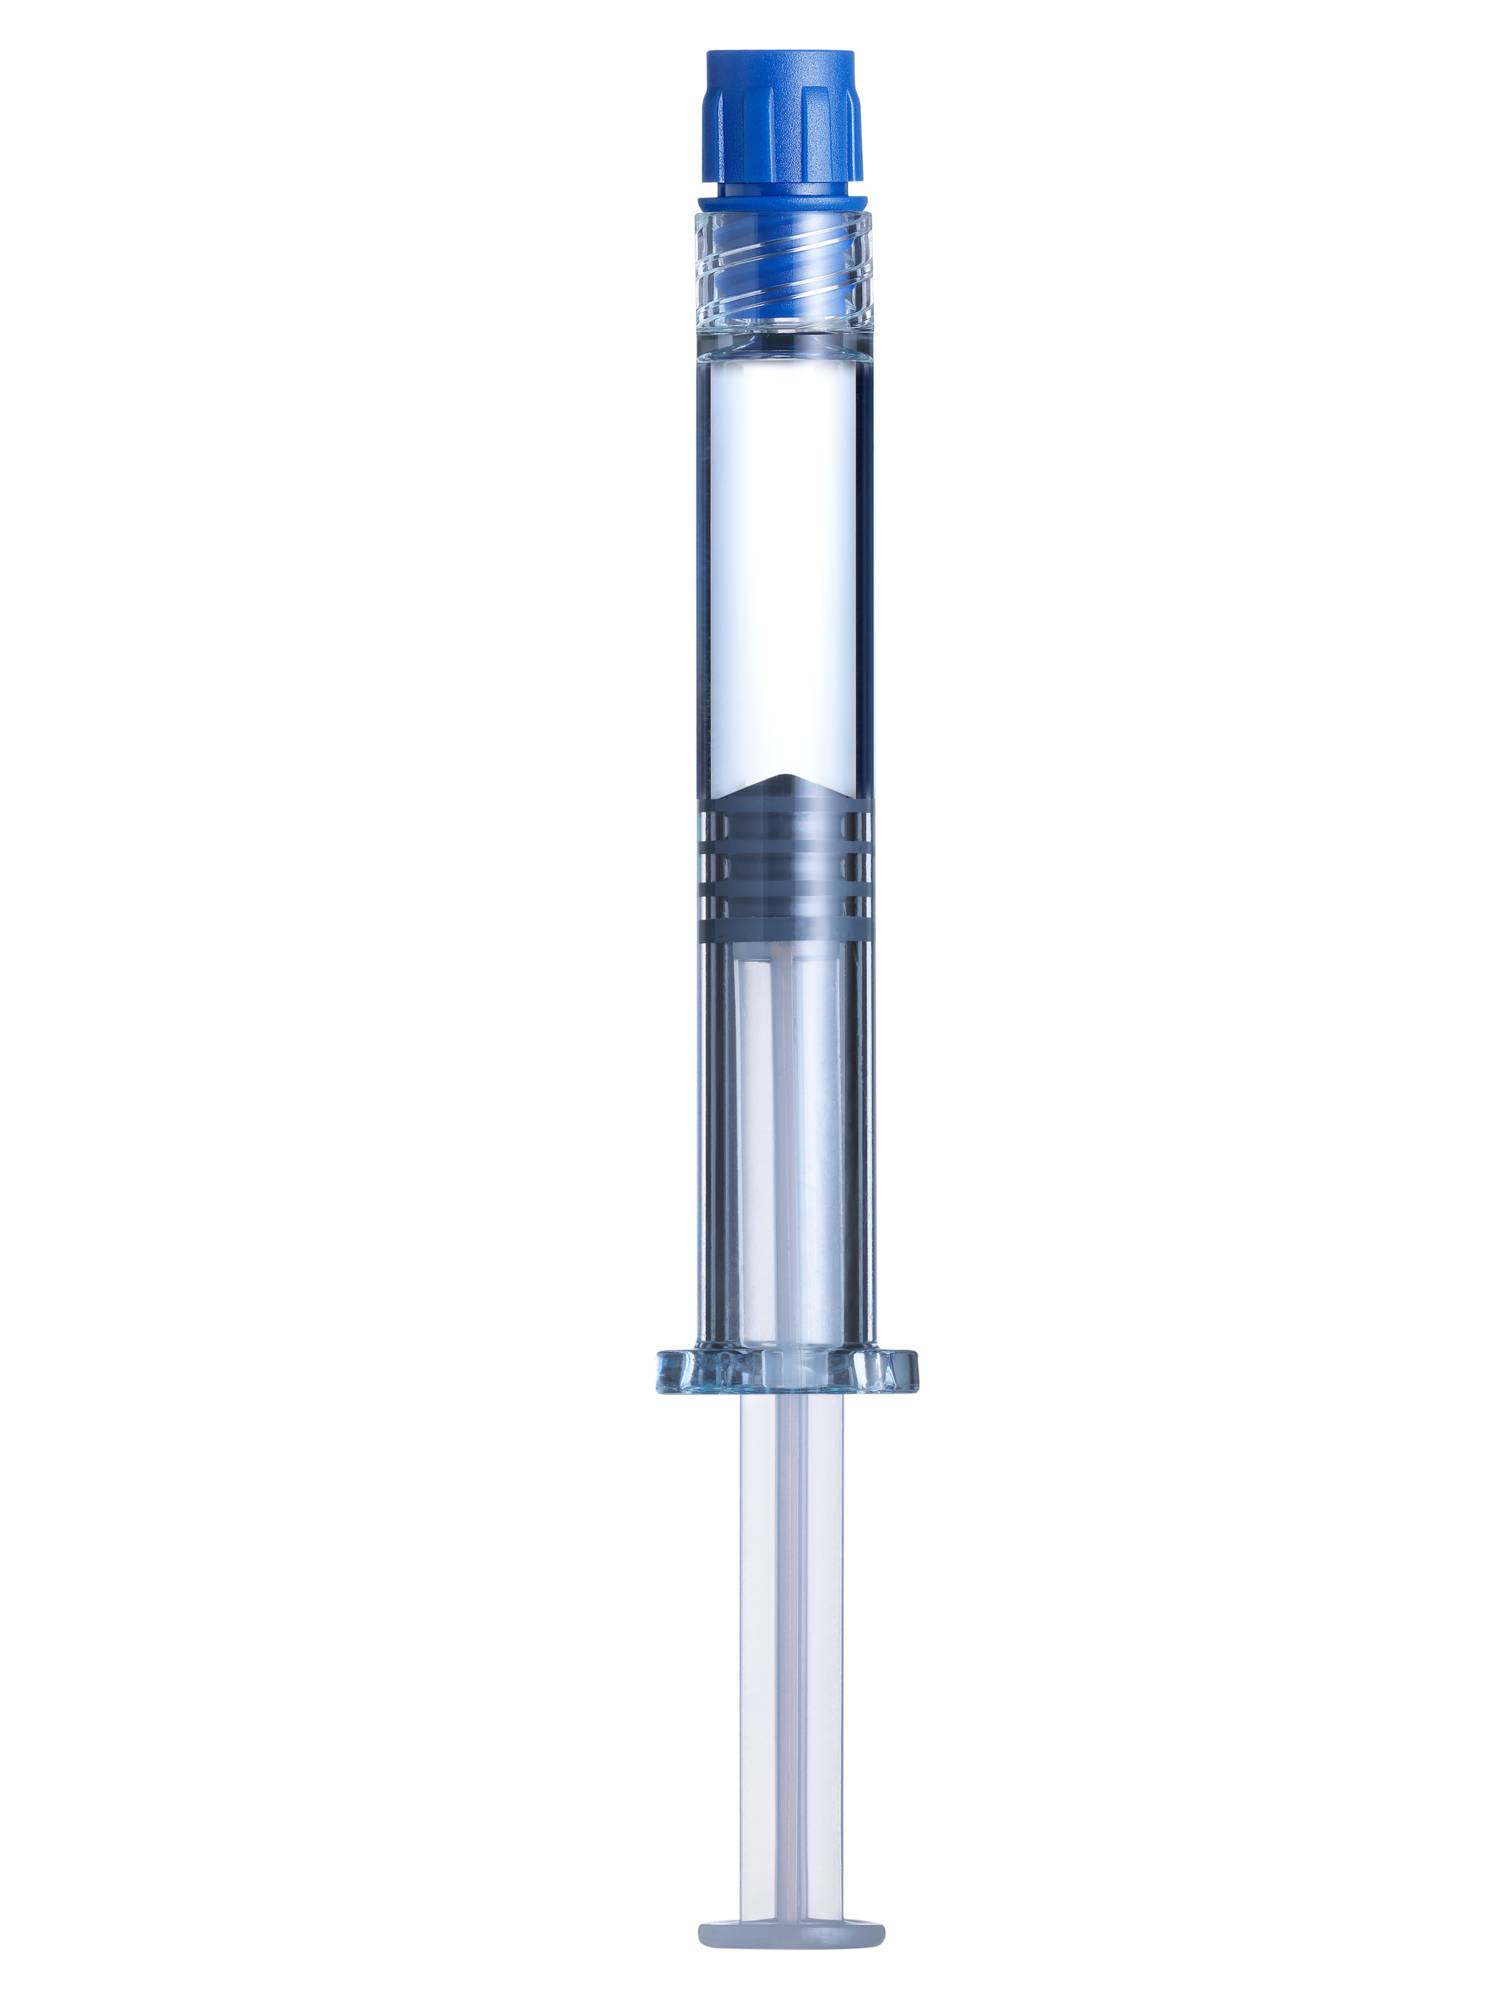 SCHOTT Toppac syringes with TRC cab